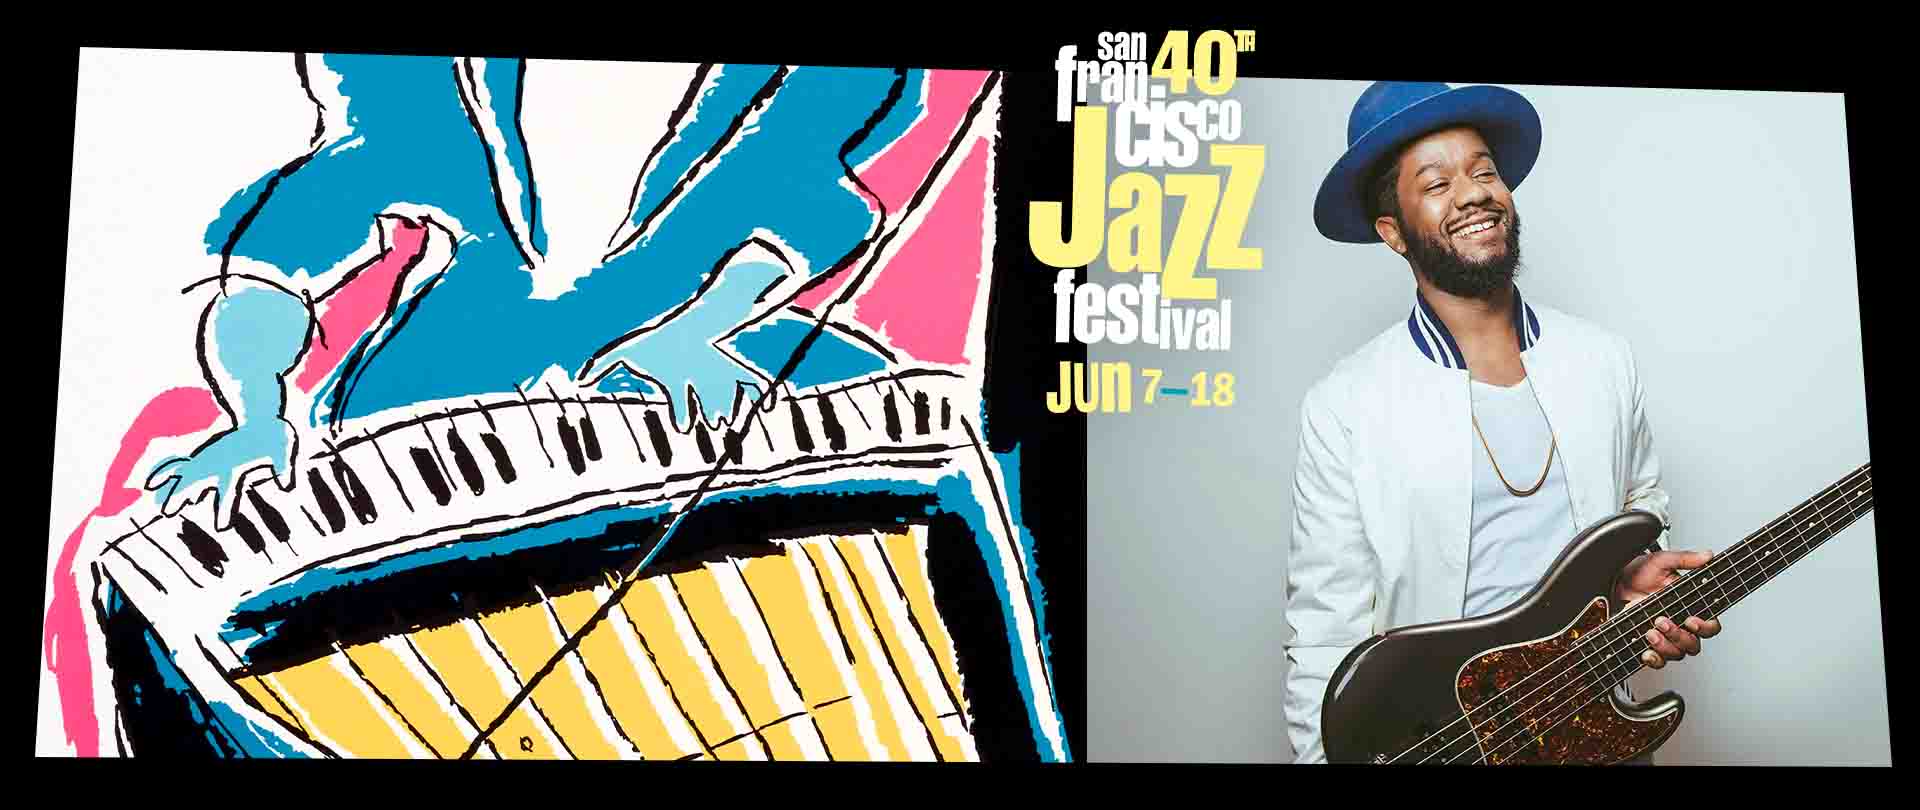 A photo of Ben Williams with the San Francisco Jazz Festival artwork